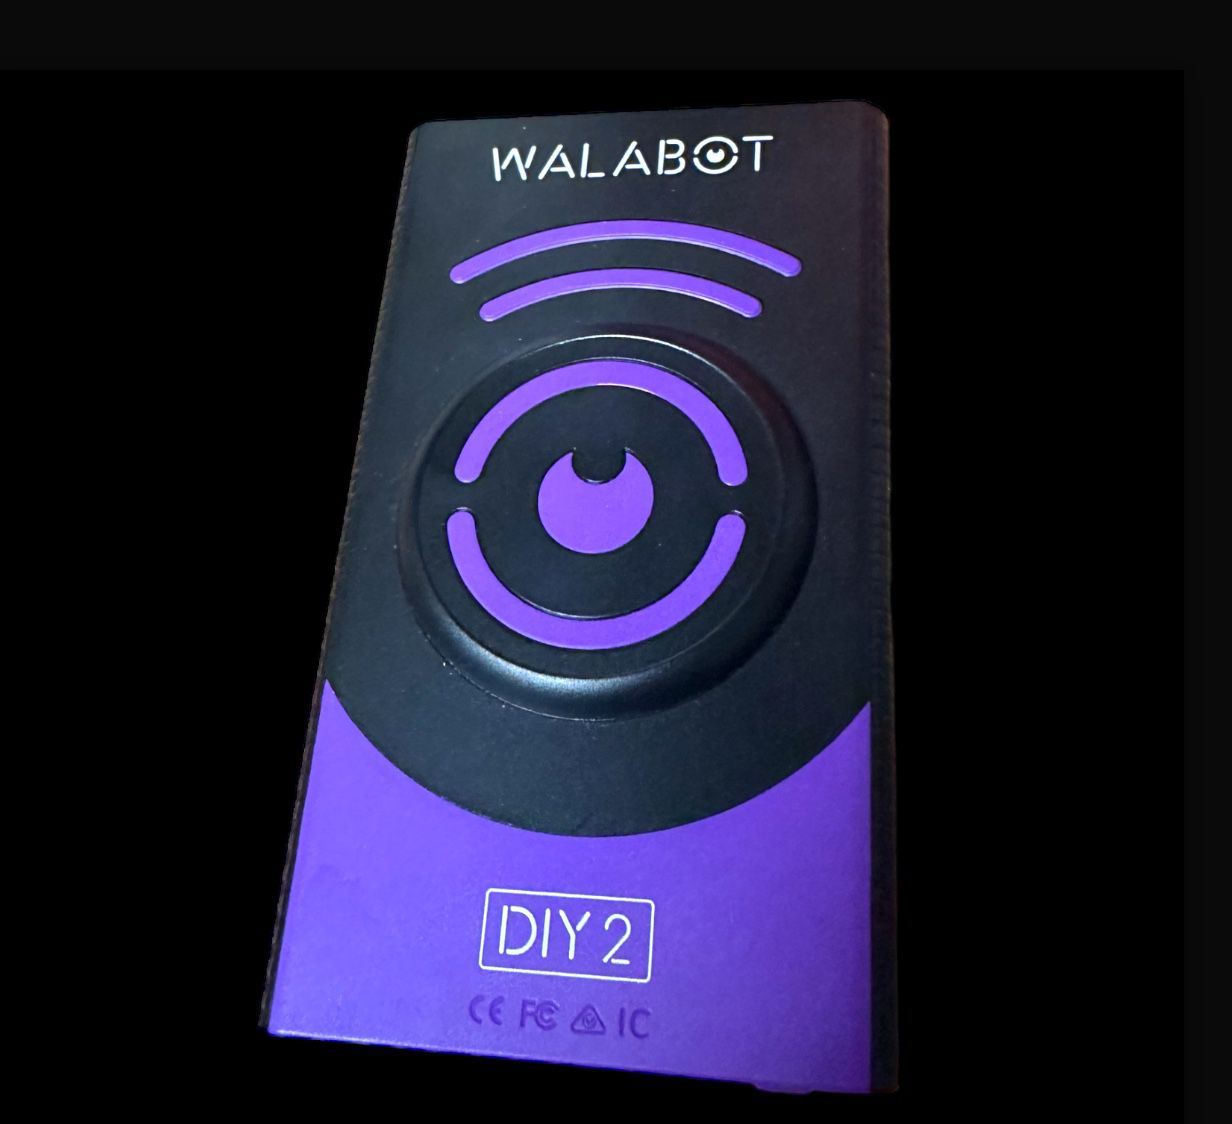 WALABOT DIY PLUS Wall Scanner for Sale in San Antonio, TX - OfferUp